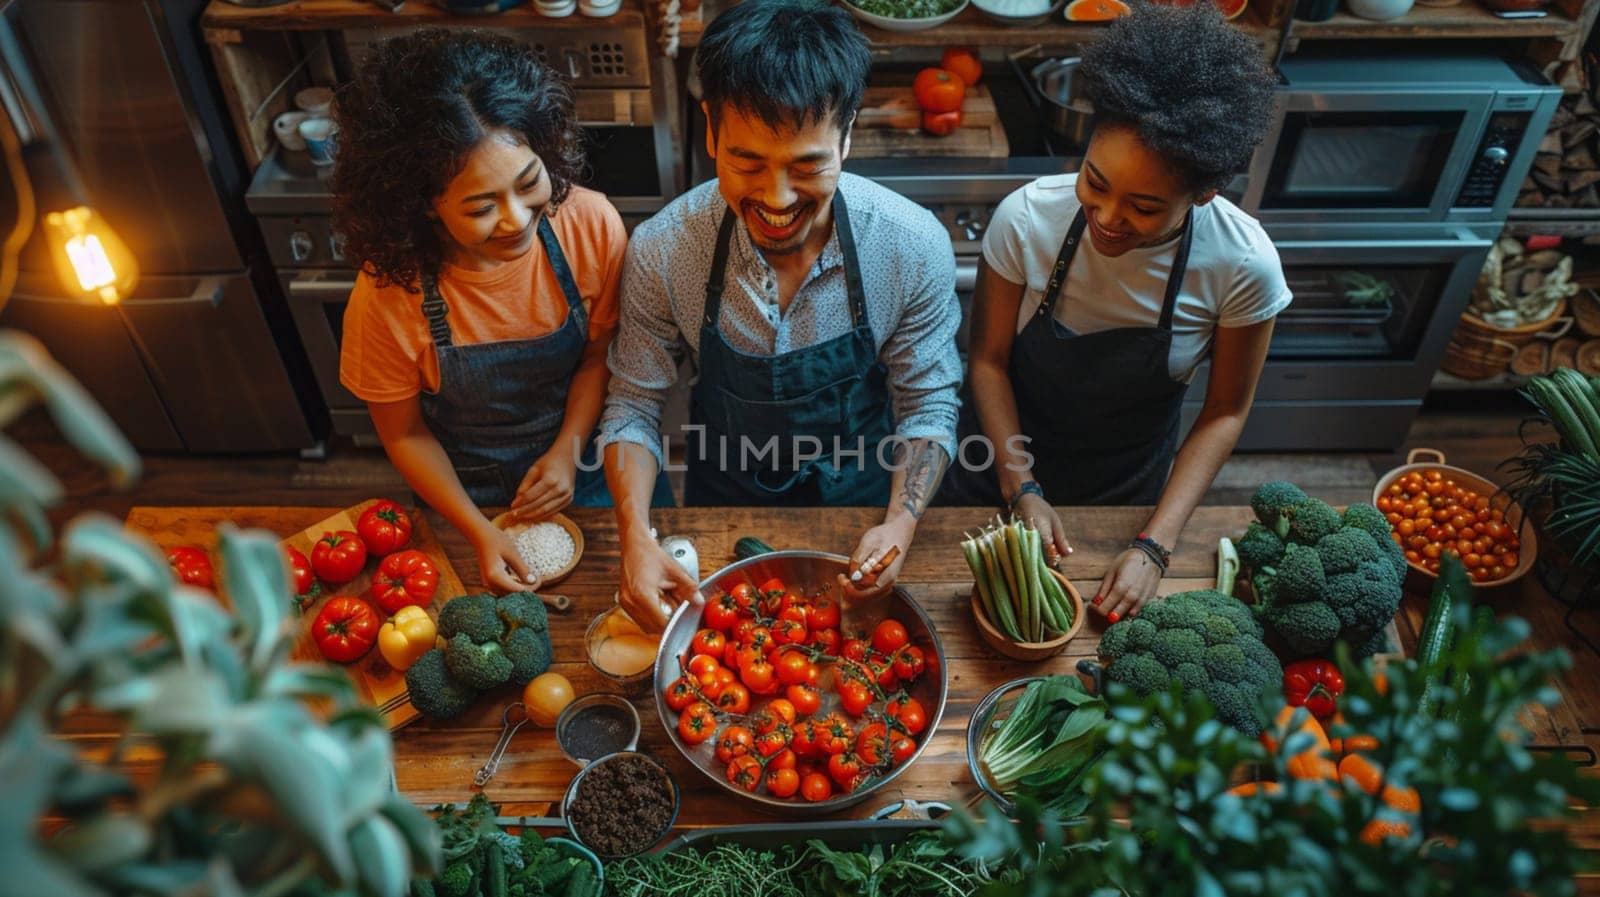 Three people are in a kitchen, preparing food by verbano